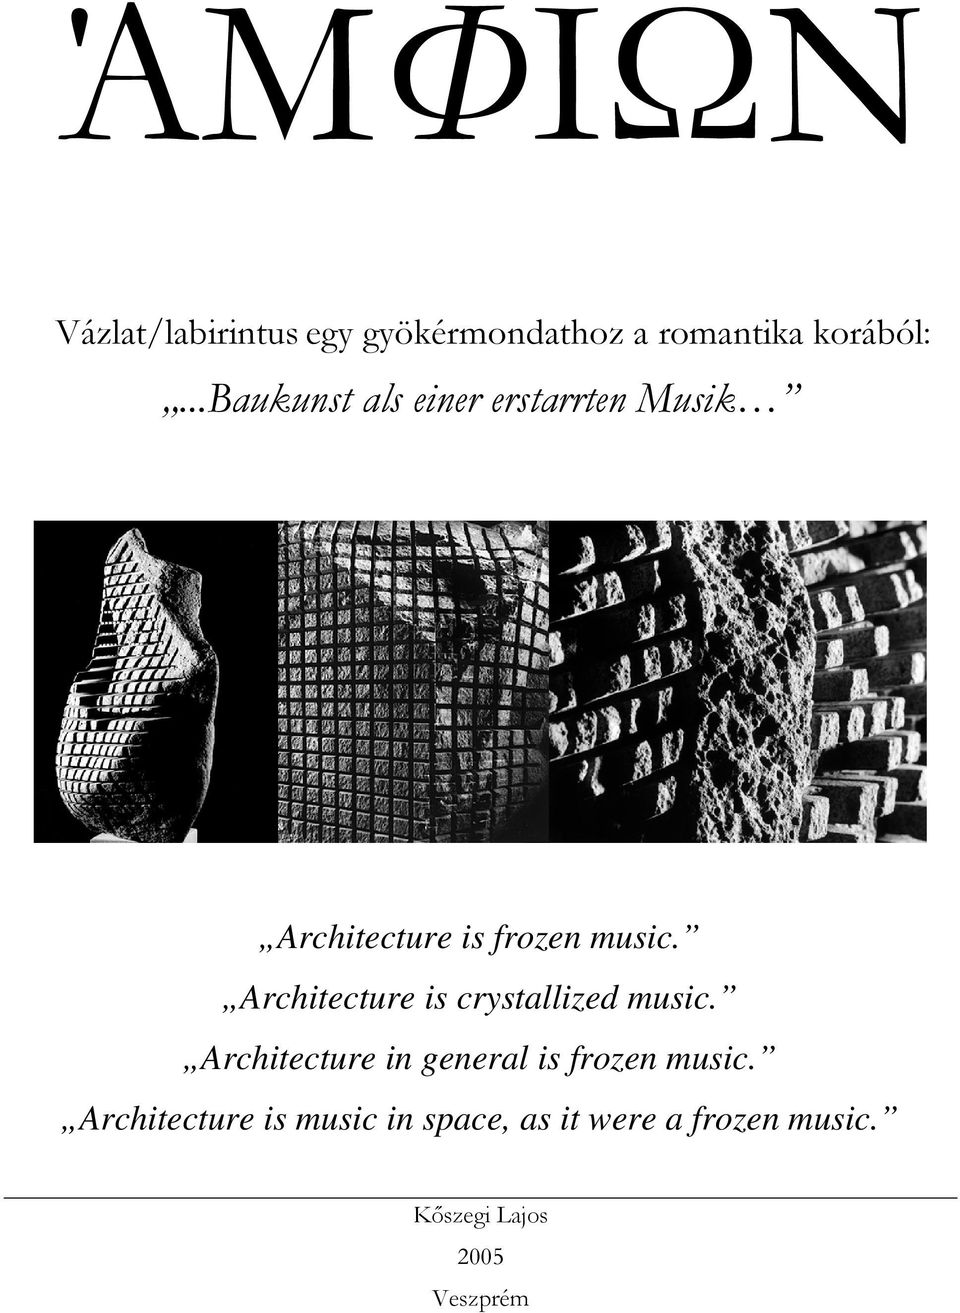 Architecture is crystallized music.